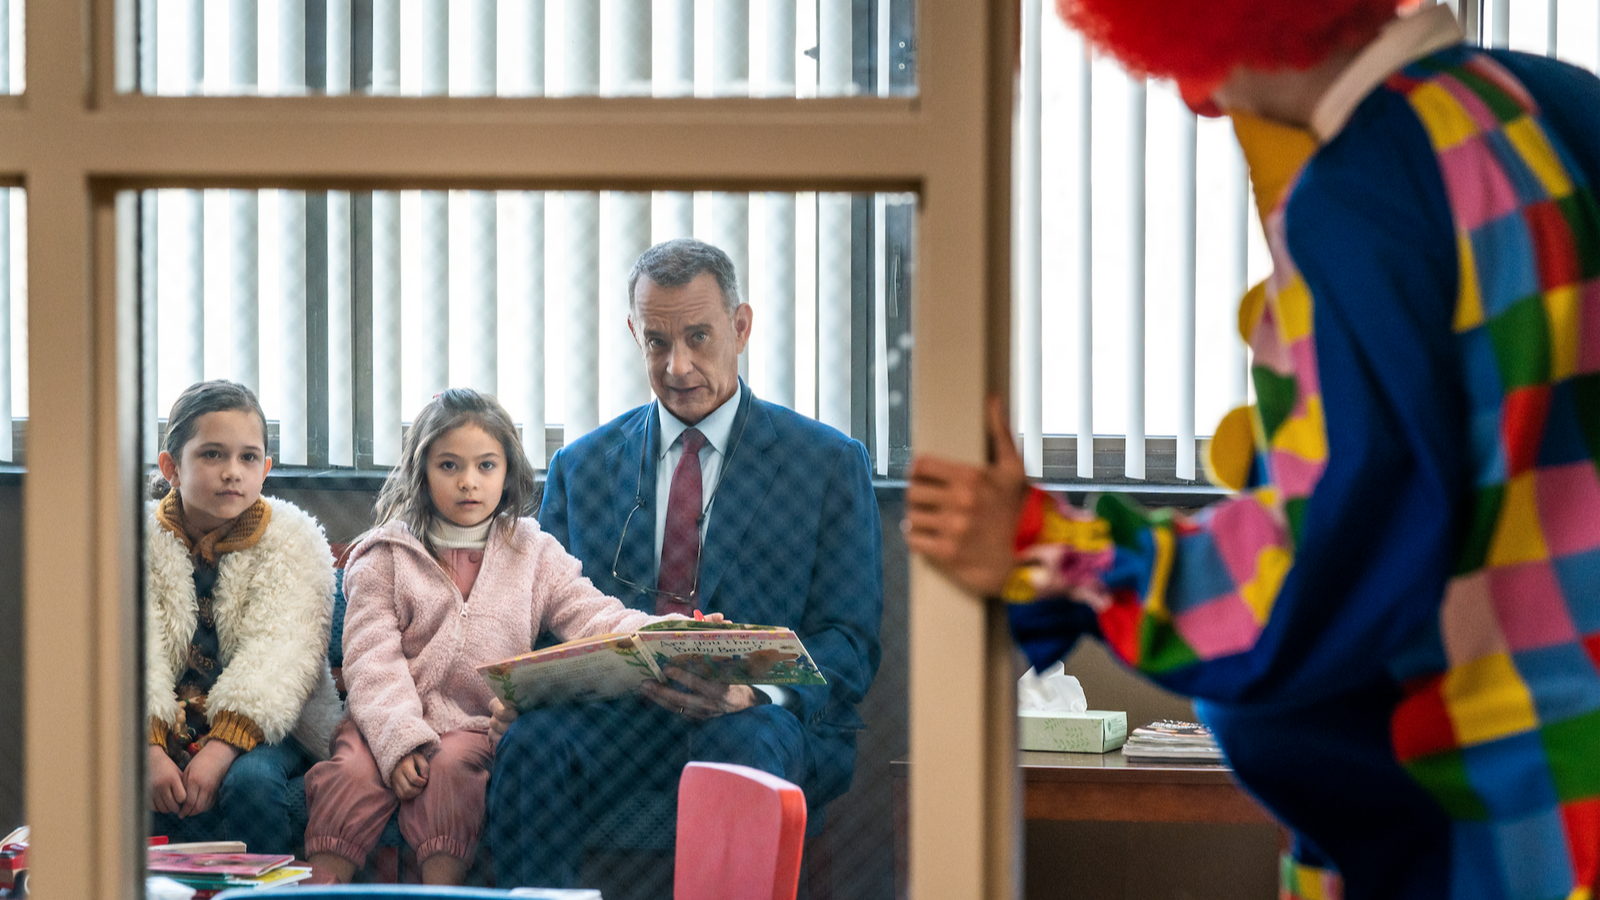 Tom Hanks reads a book to two young girls with a clown nearby, 